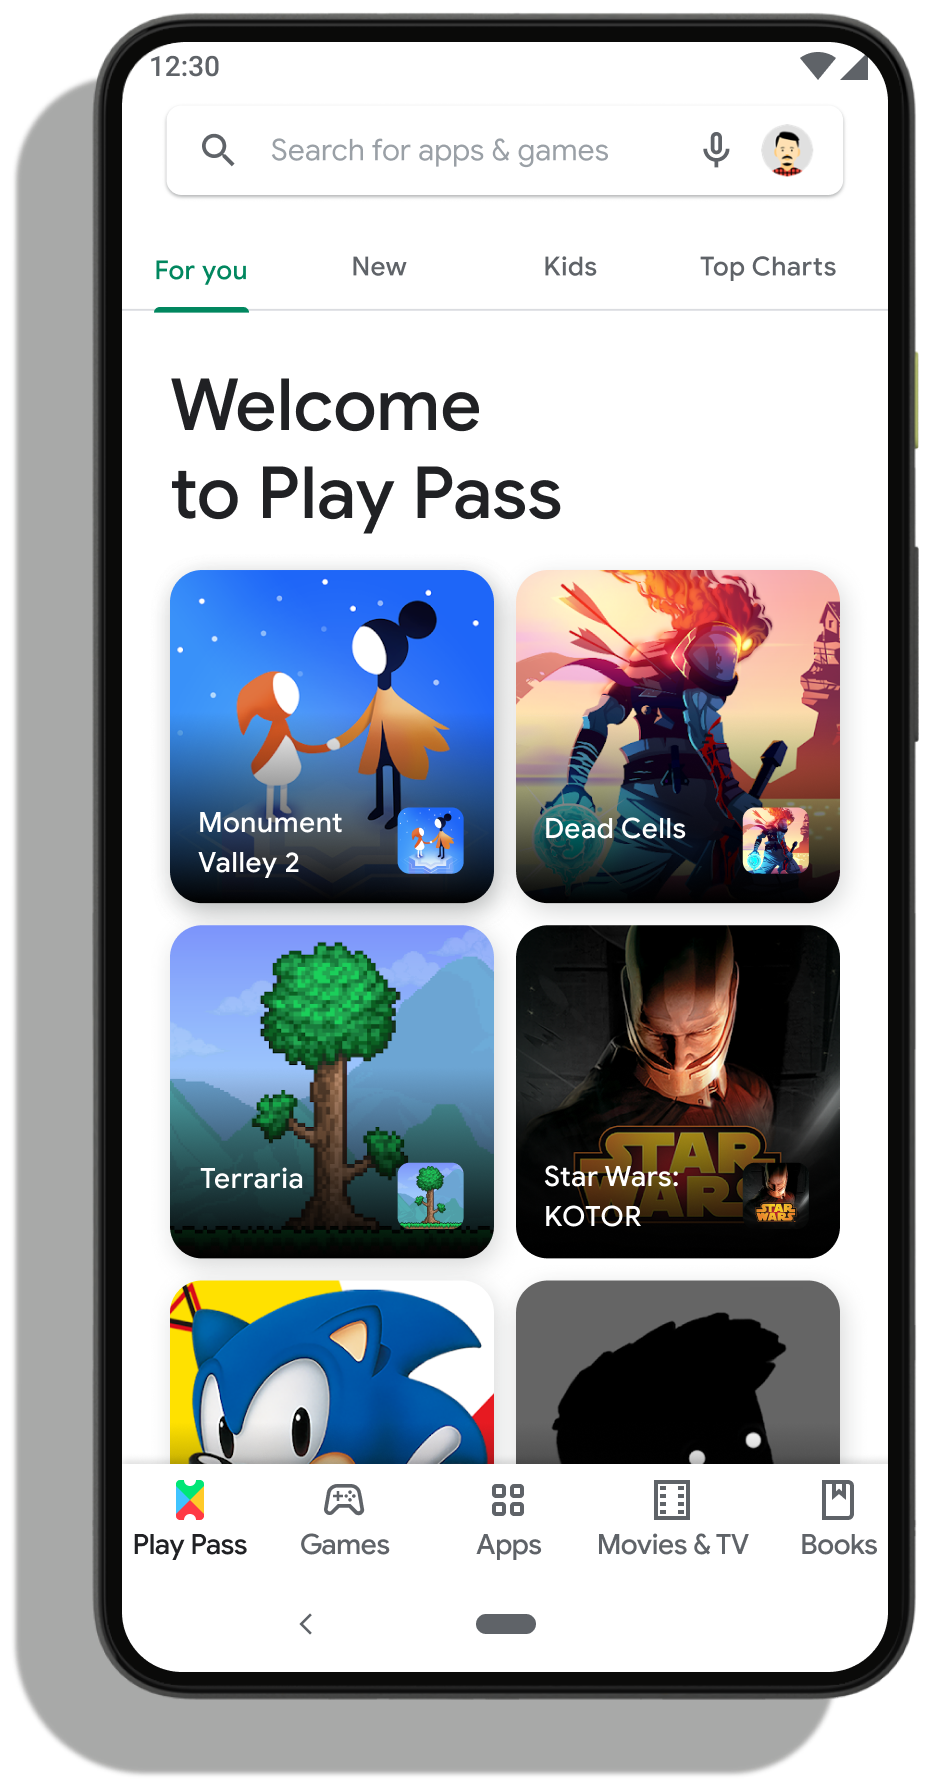 All Games App : 1000+ Games - Apps on Google Play